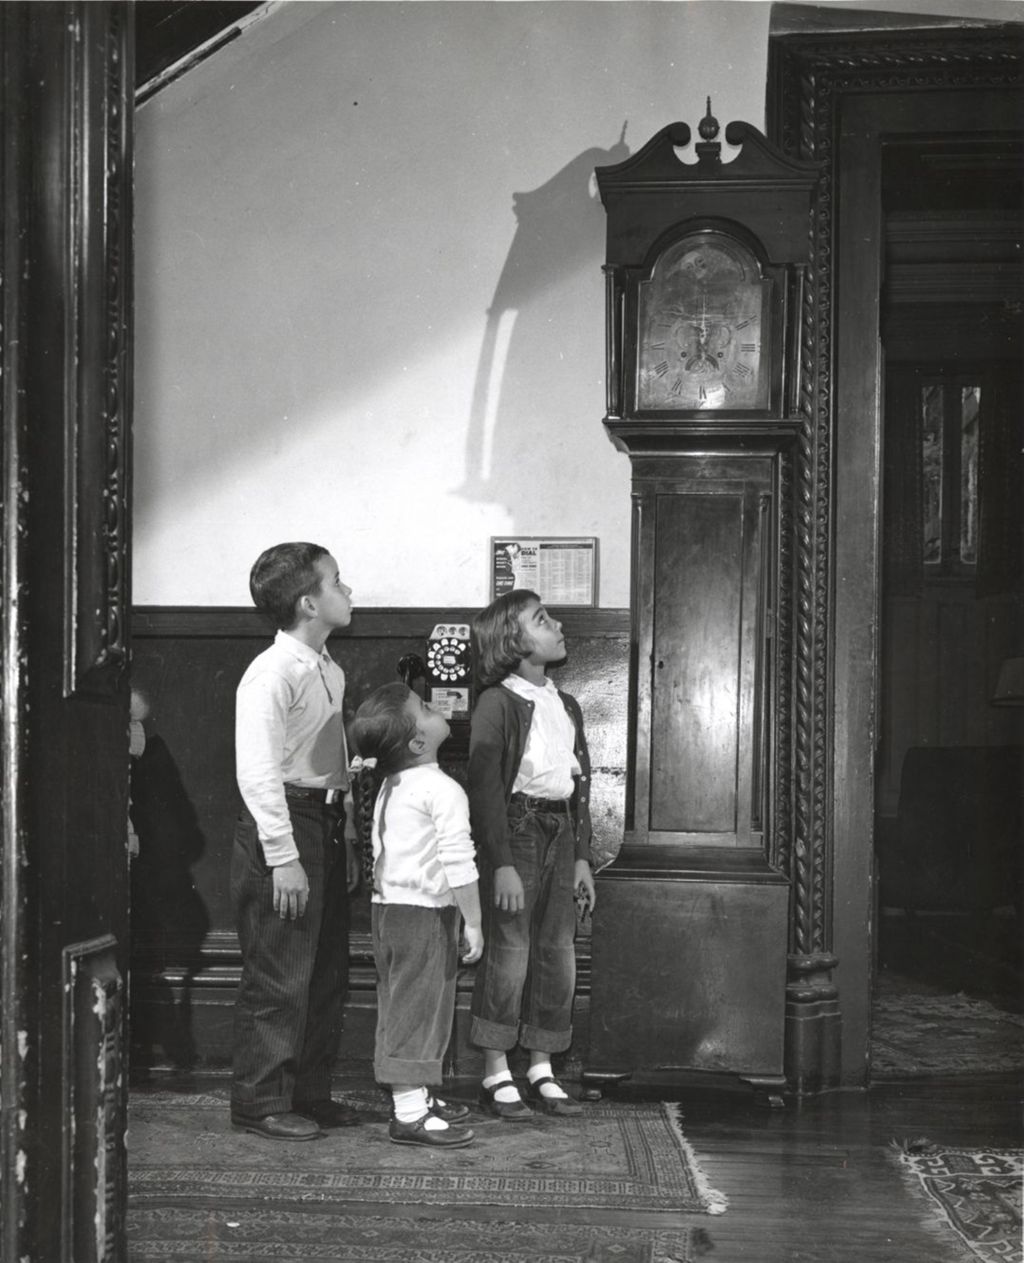 Three children looking up at grandfather clock